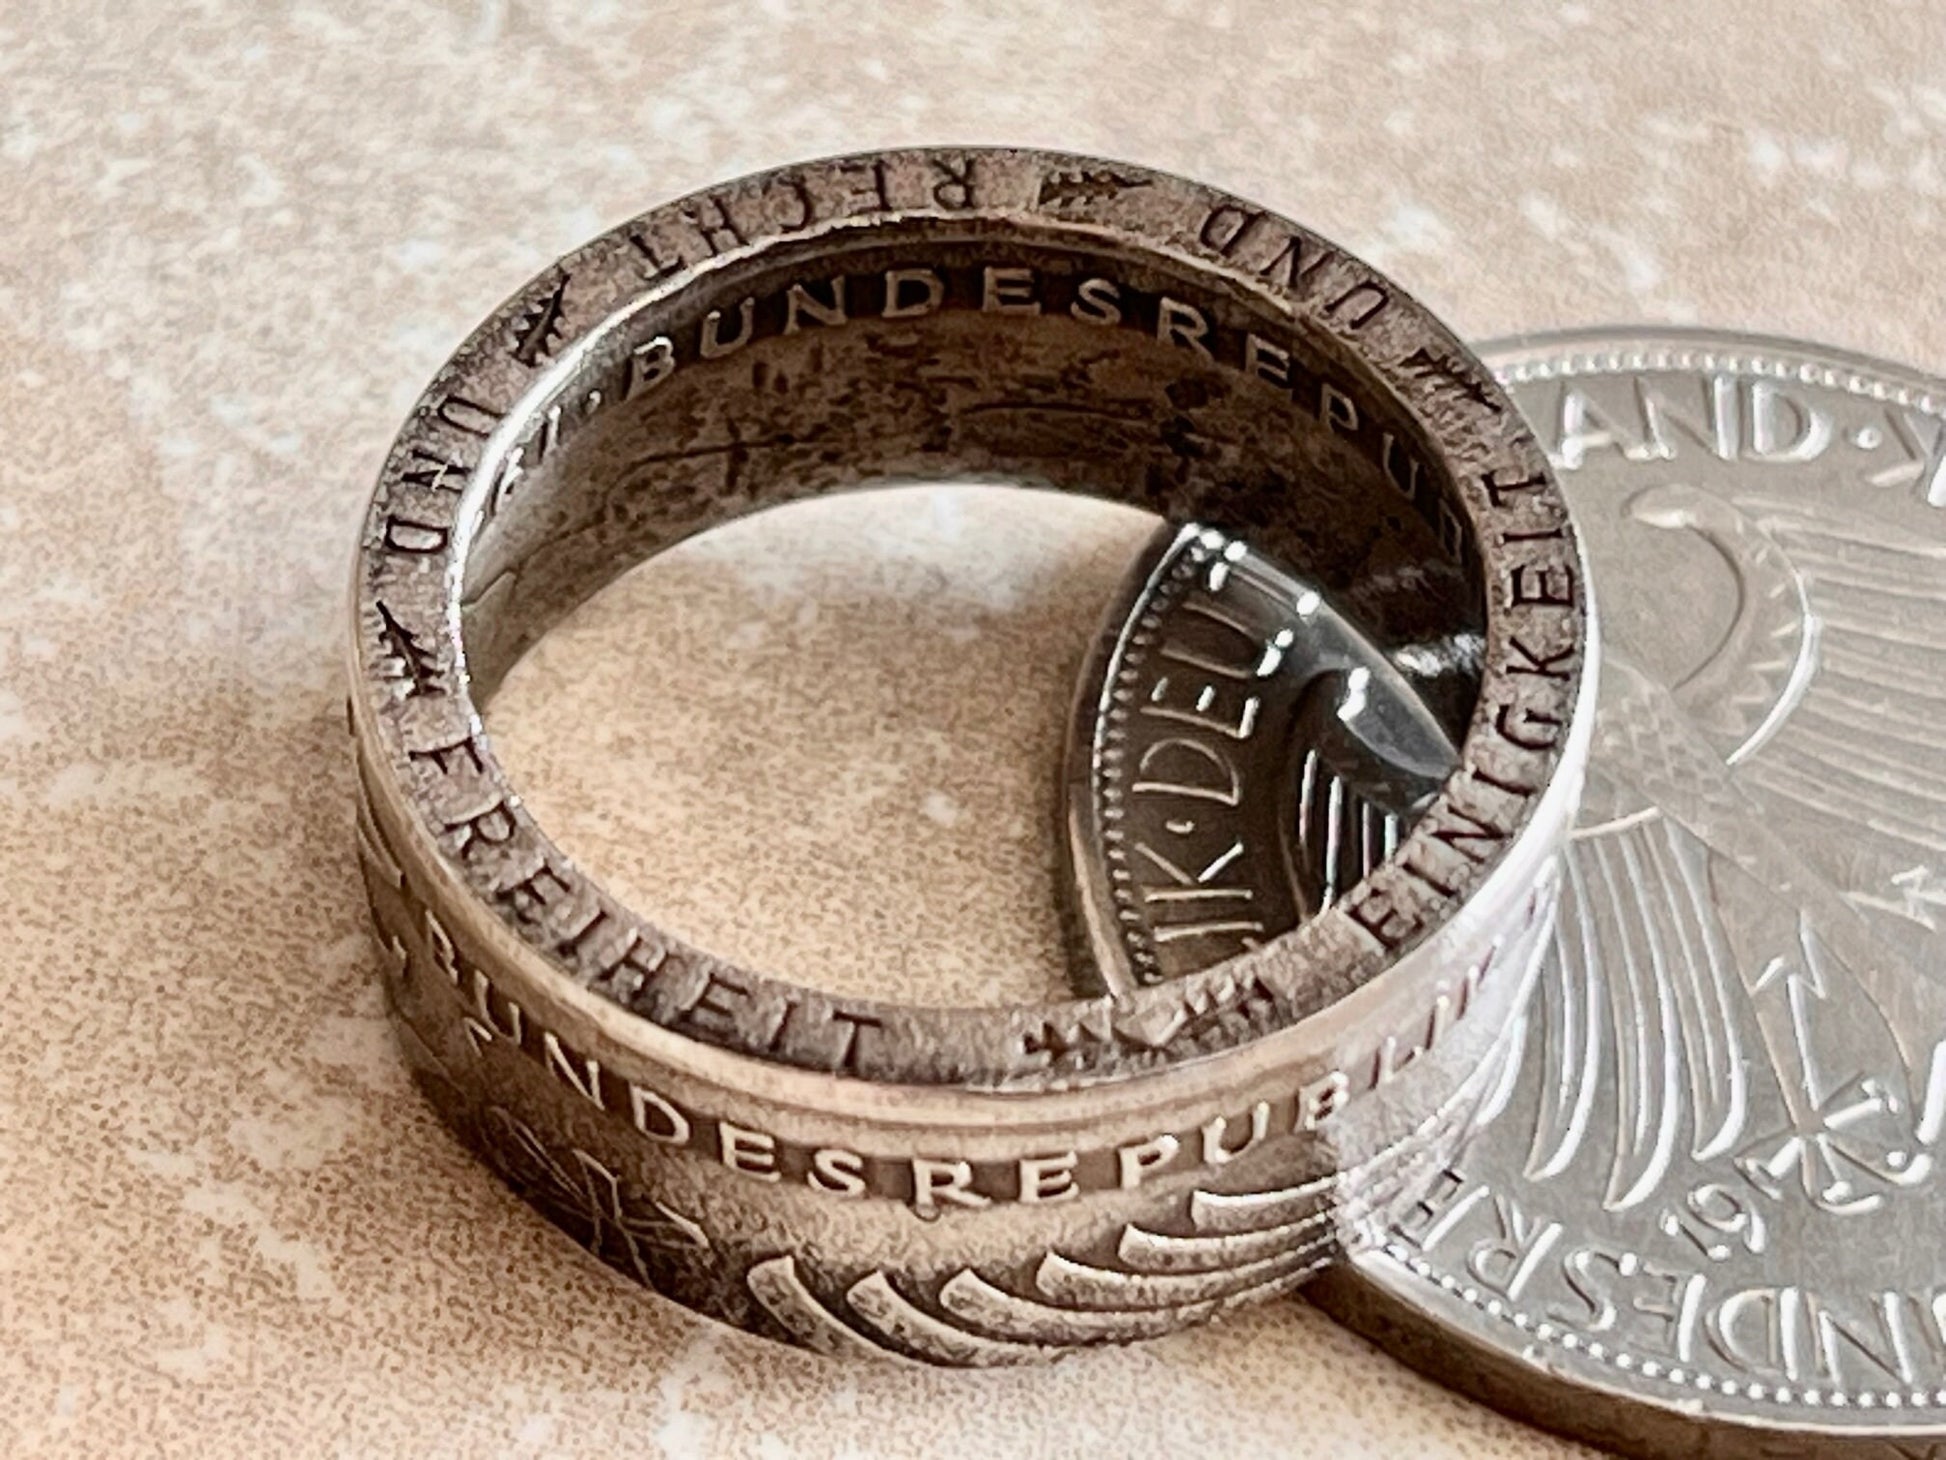 Germany Coin Ring 2 Mark German Eagle Ring Handmade Personal Custom Ring Gift For Friend Coin Ring Gift For Him Her World Coin Collector